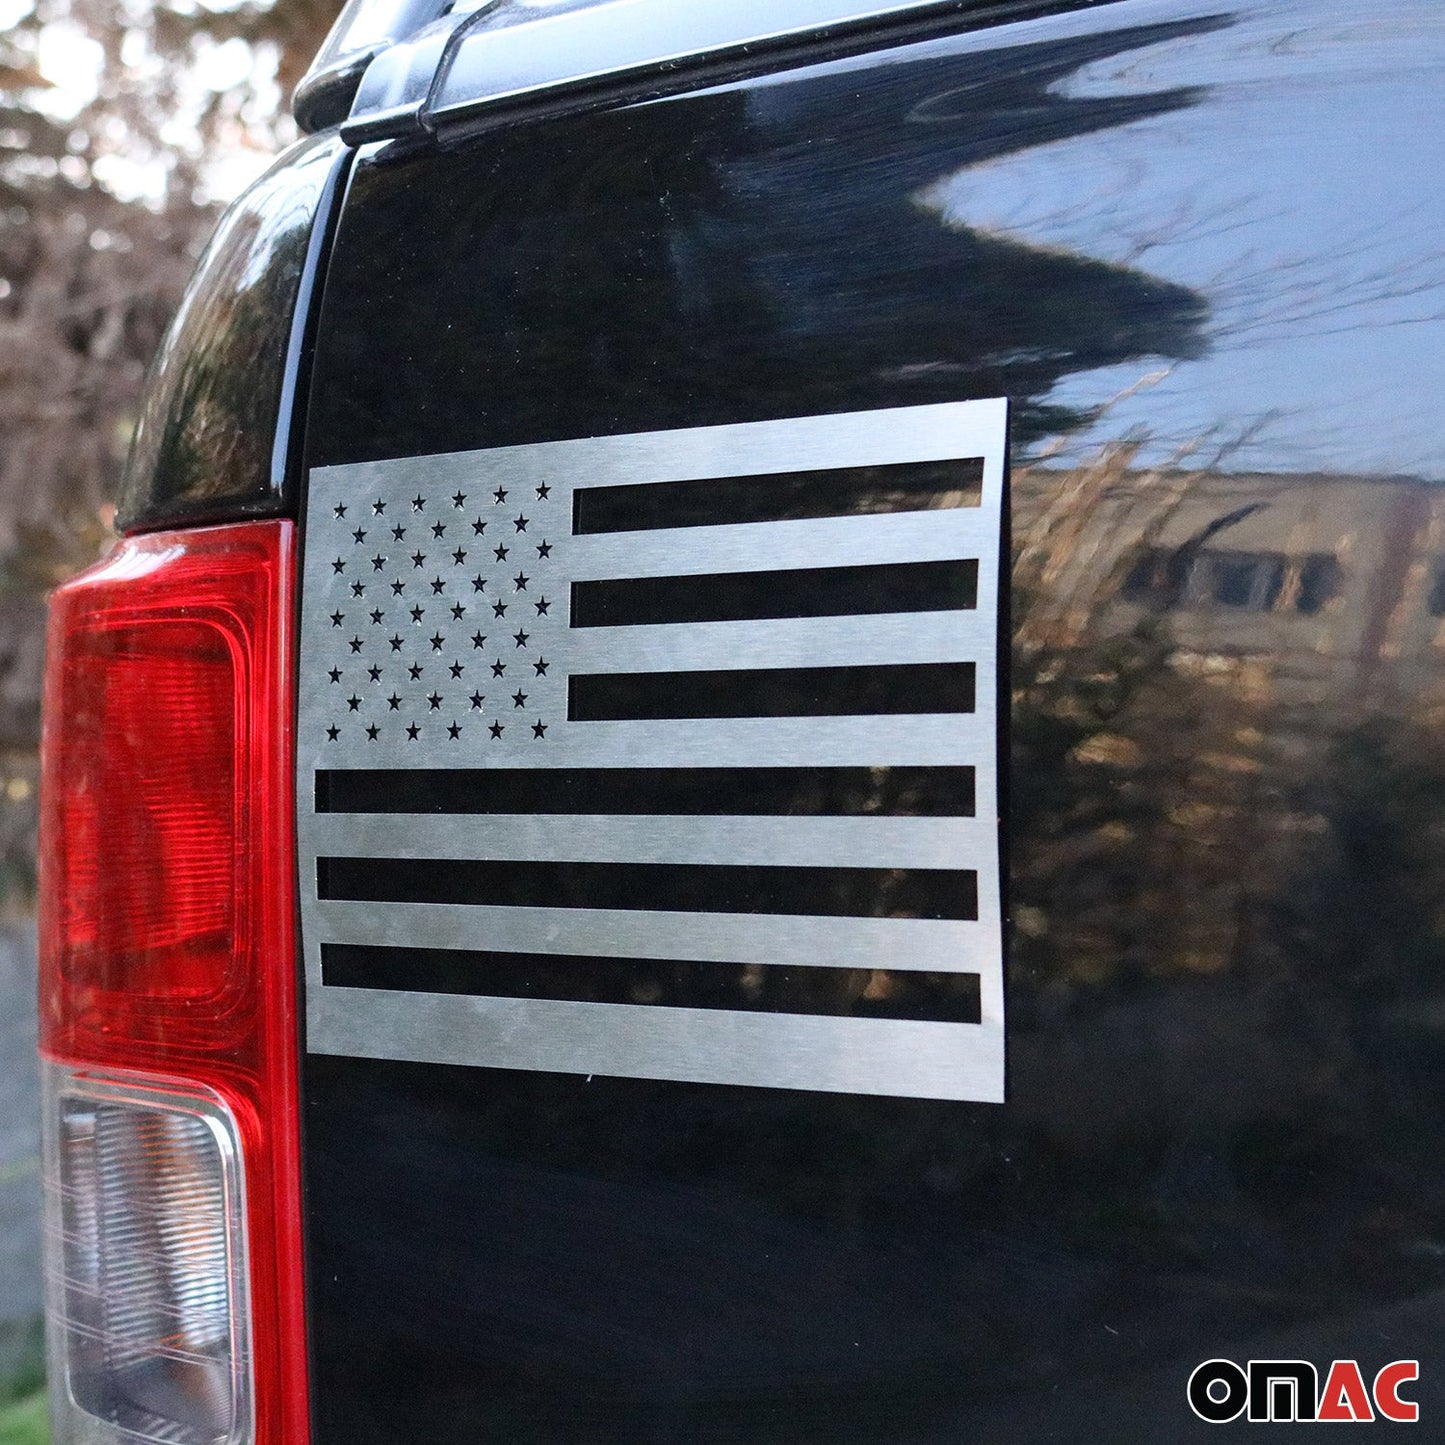 OMAC 2 Pcs US American Flag for Ford Bronco Sport Brushed Chrome Decal S.Steel U022208